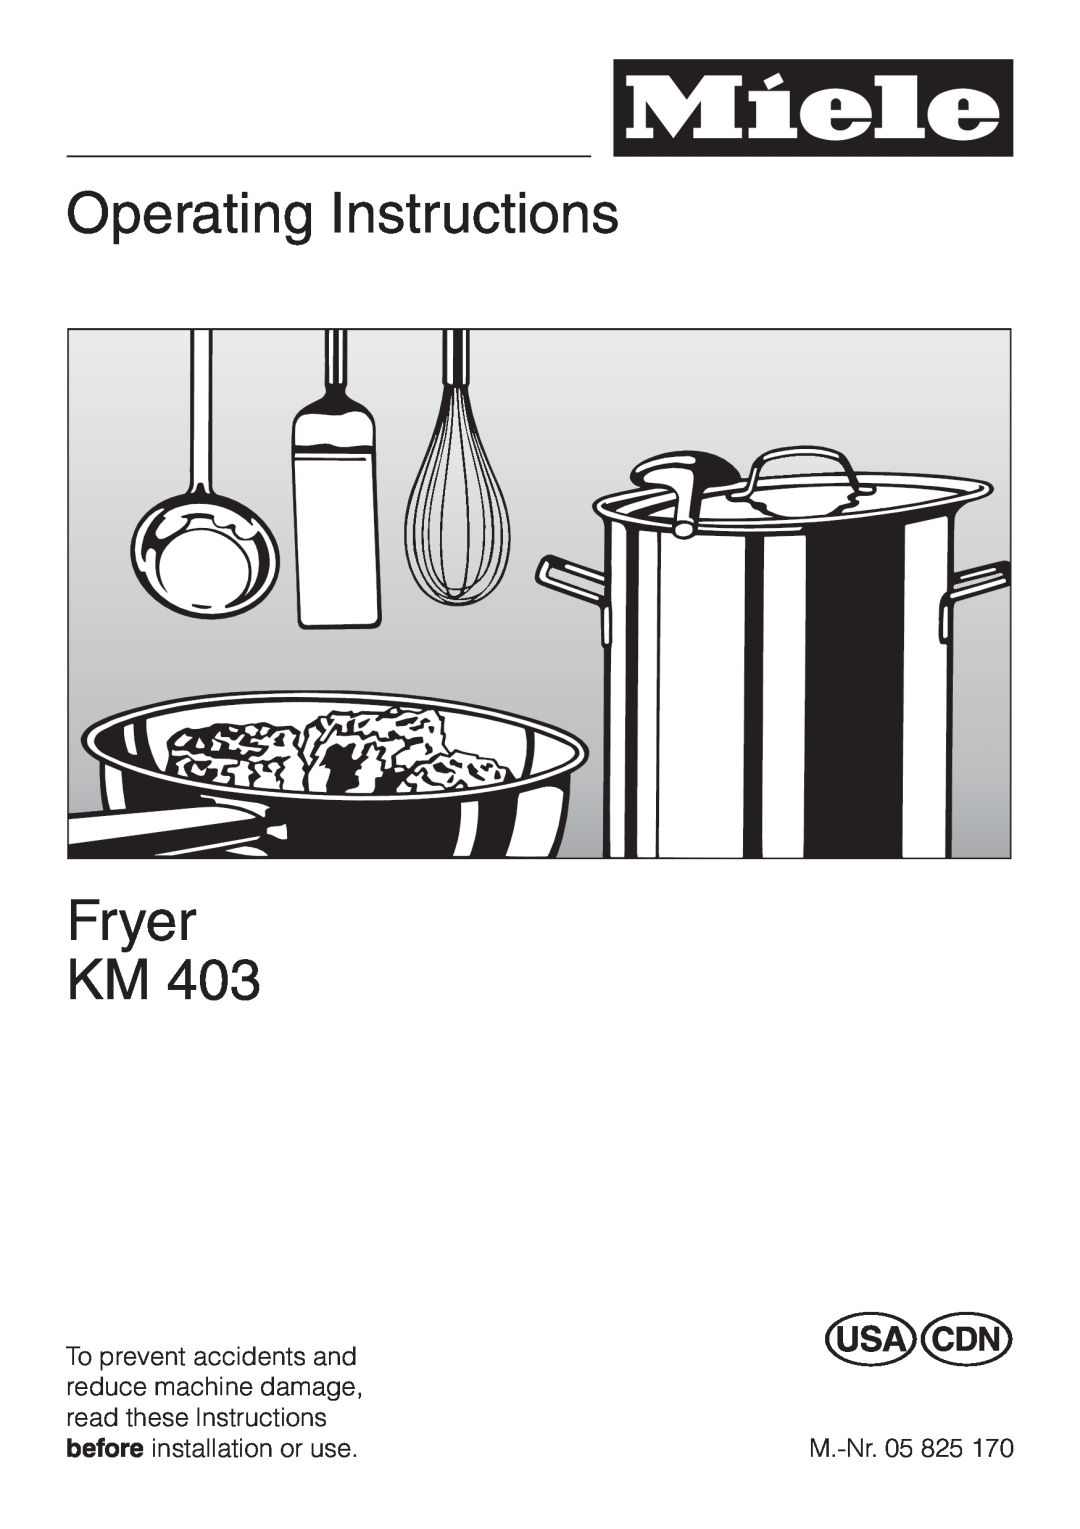 Miele KM 403 manual Operating Instructions, Fryer 